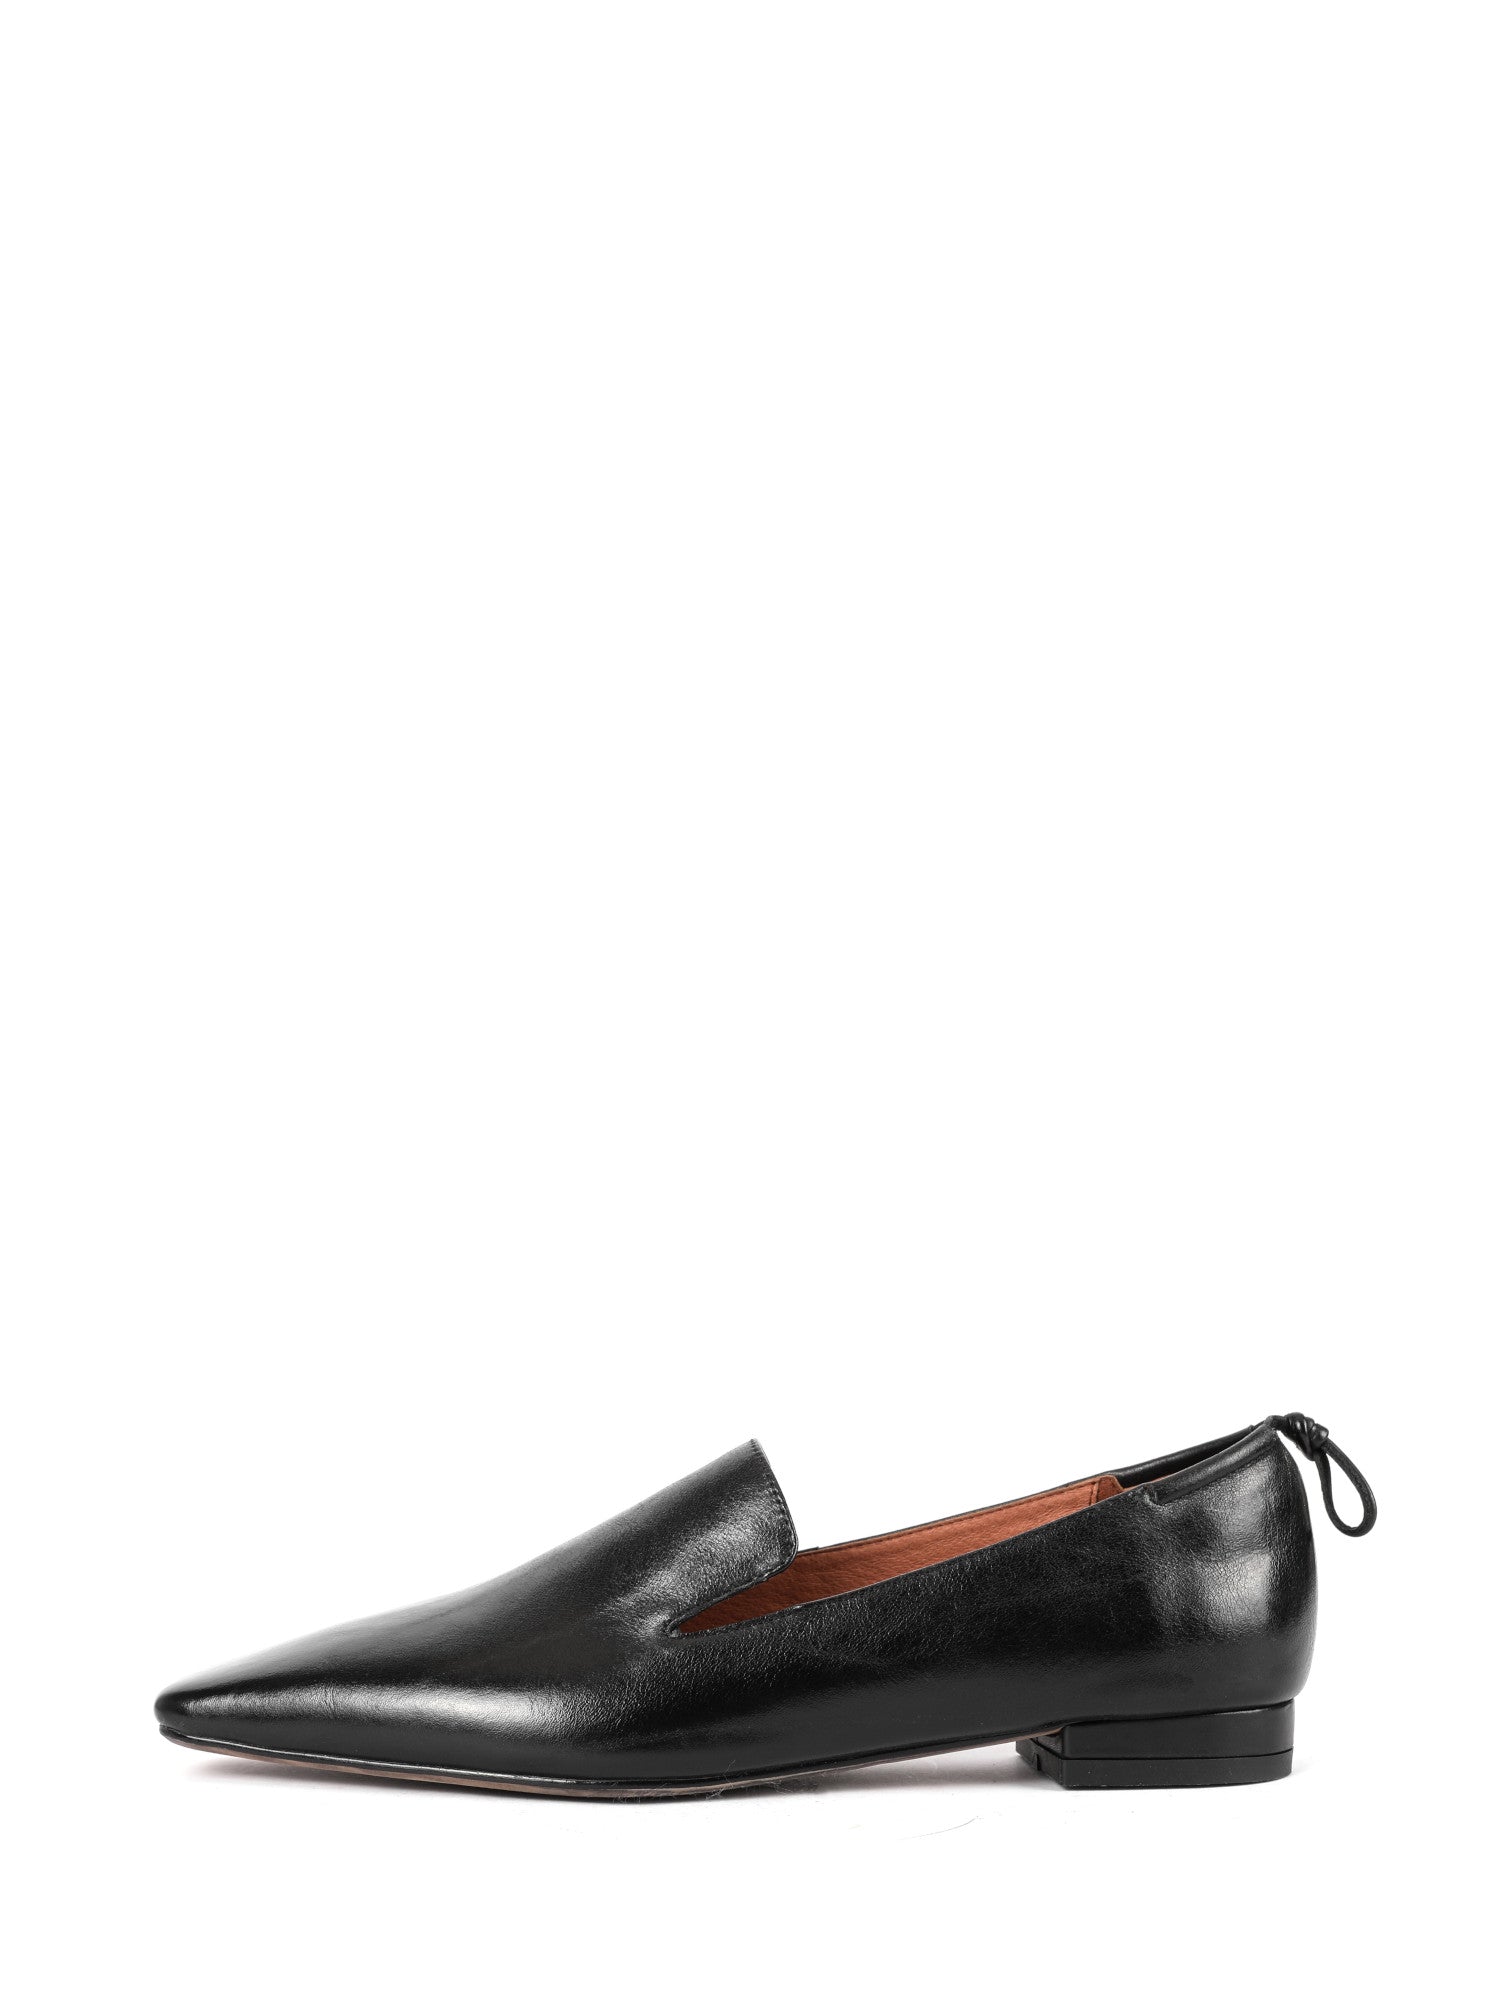 Gile-Black-Leather-Flat-Loafers